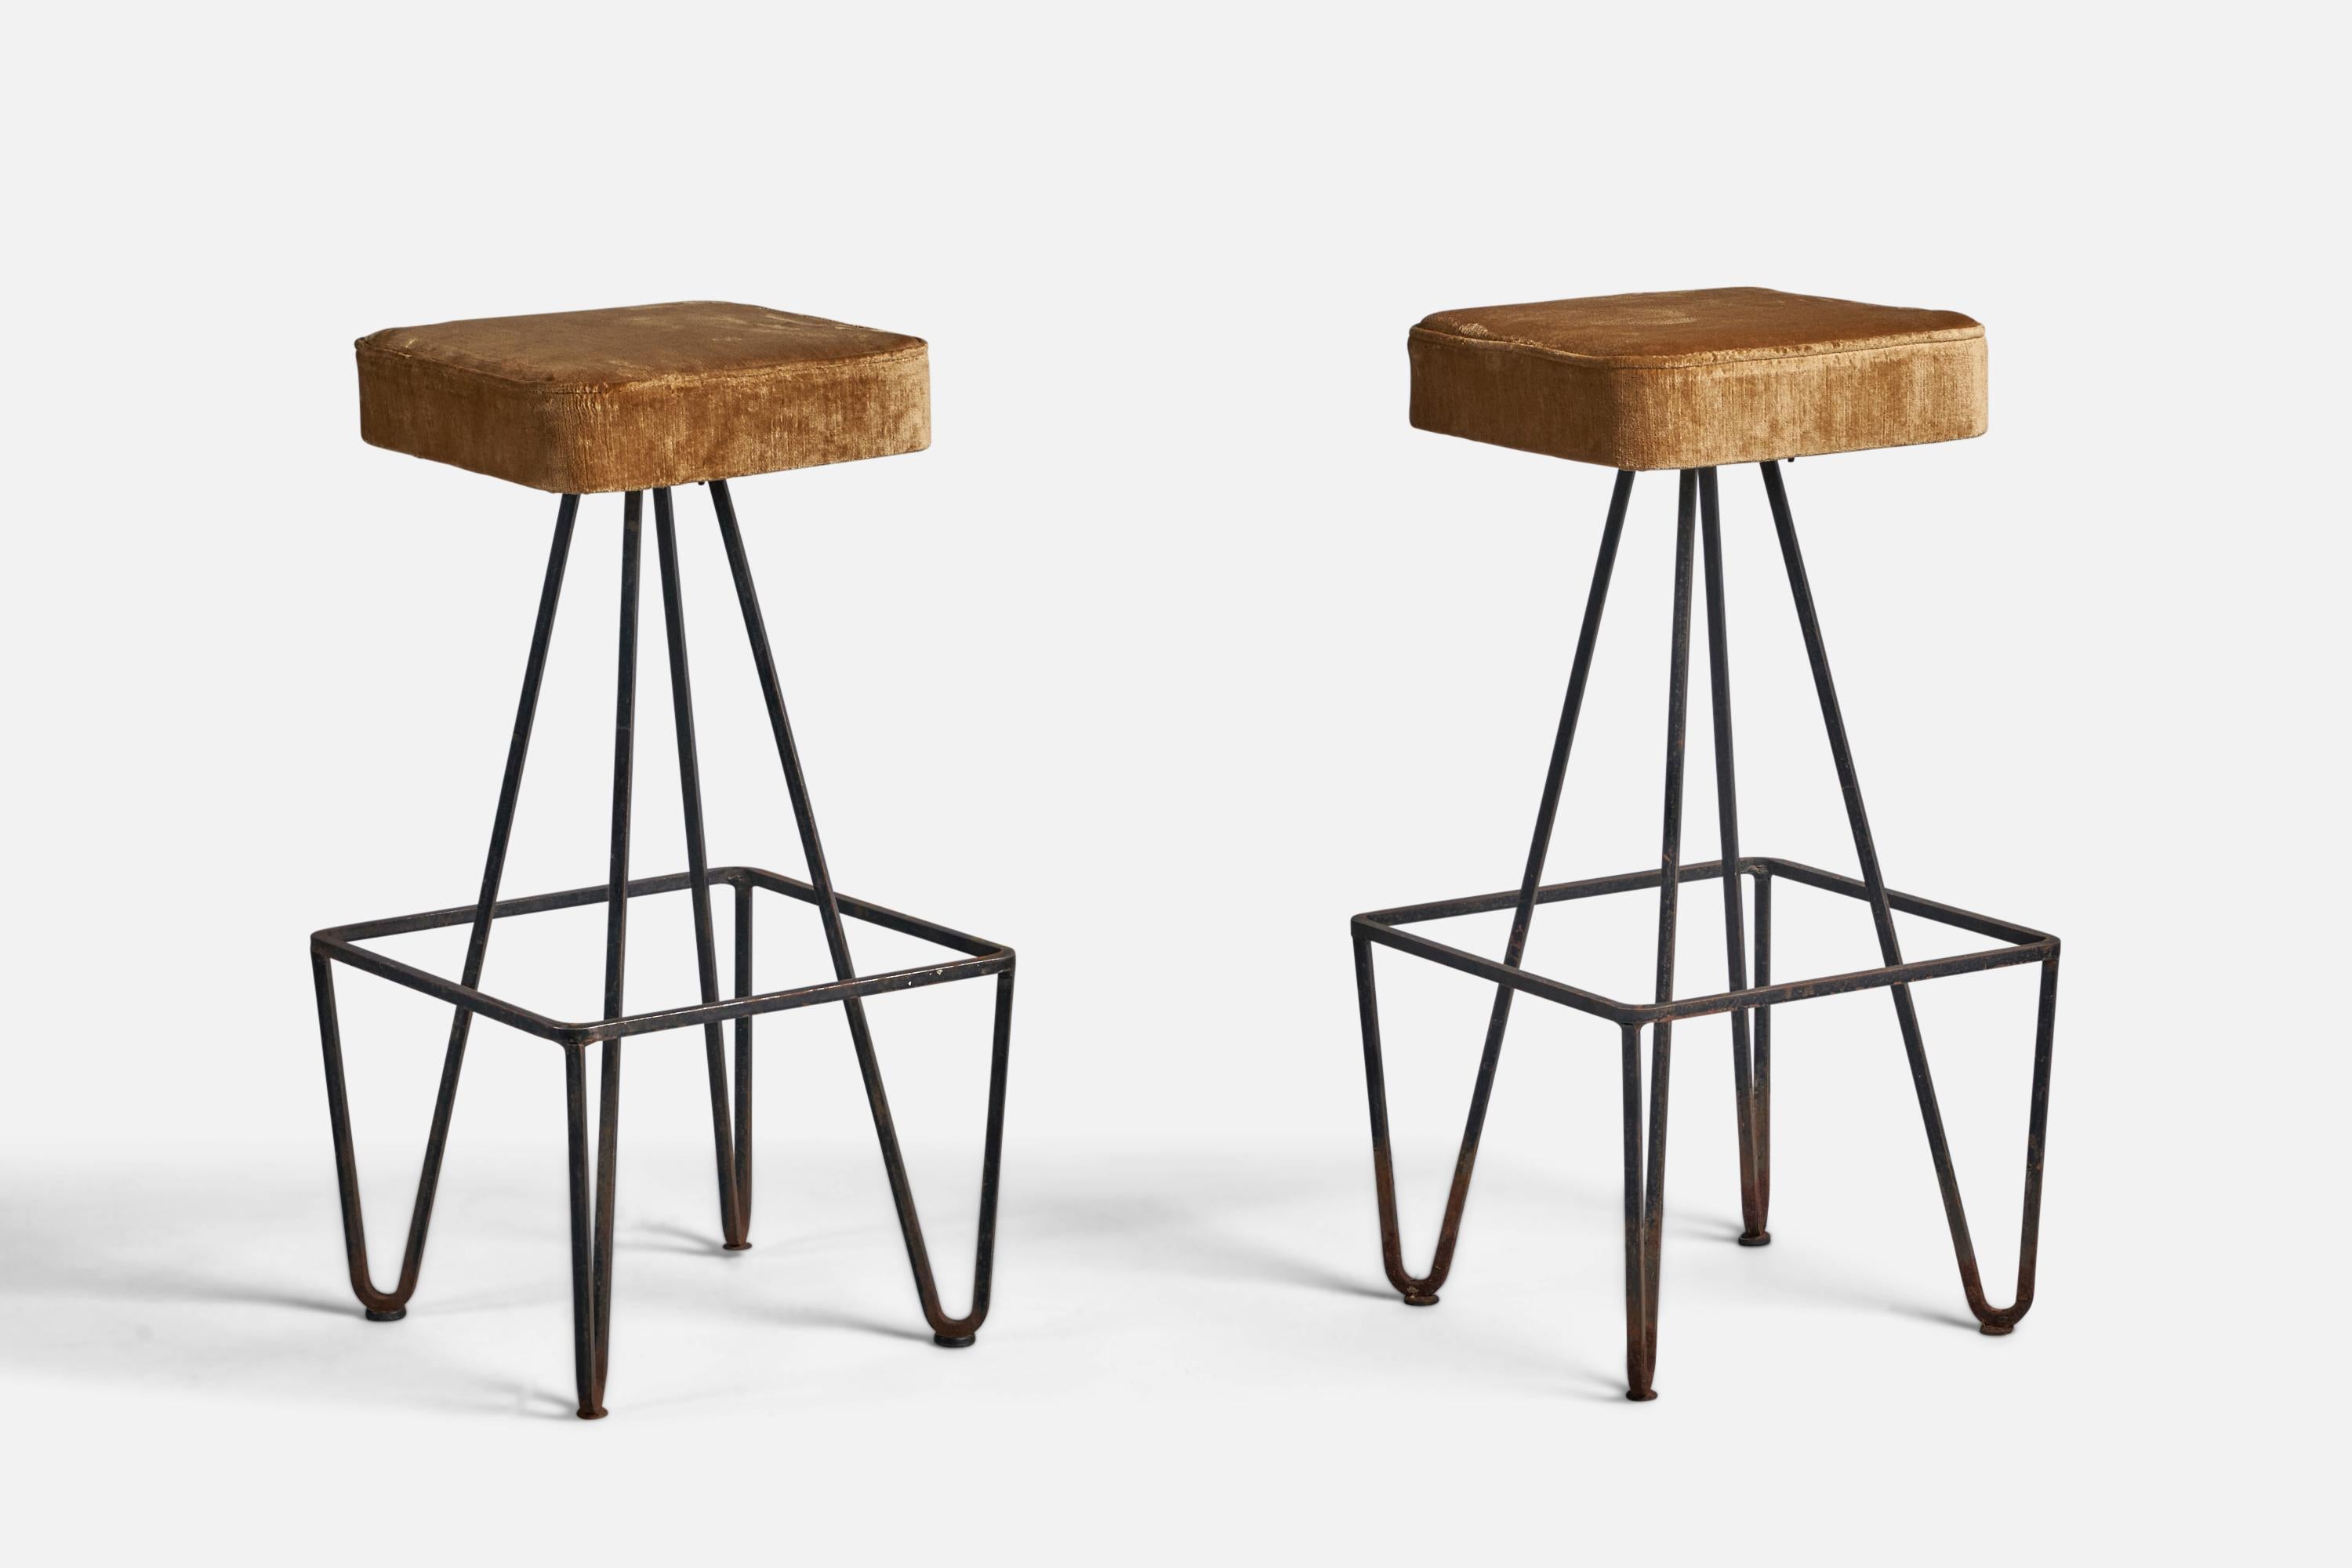 A pair of black-painted iron and beige velvet bar stools, designed and produced in the US, 1950s.

